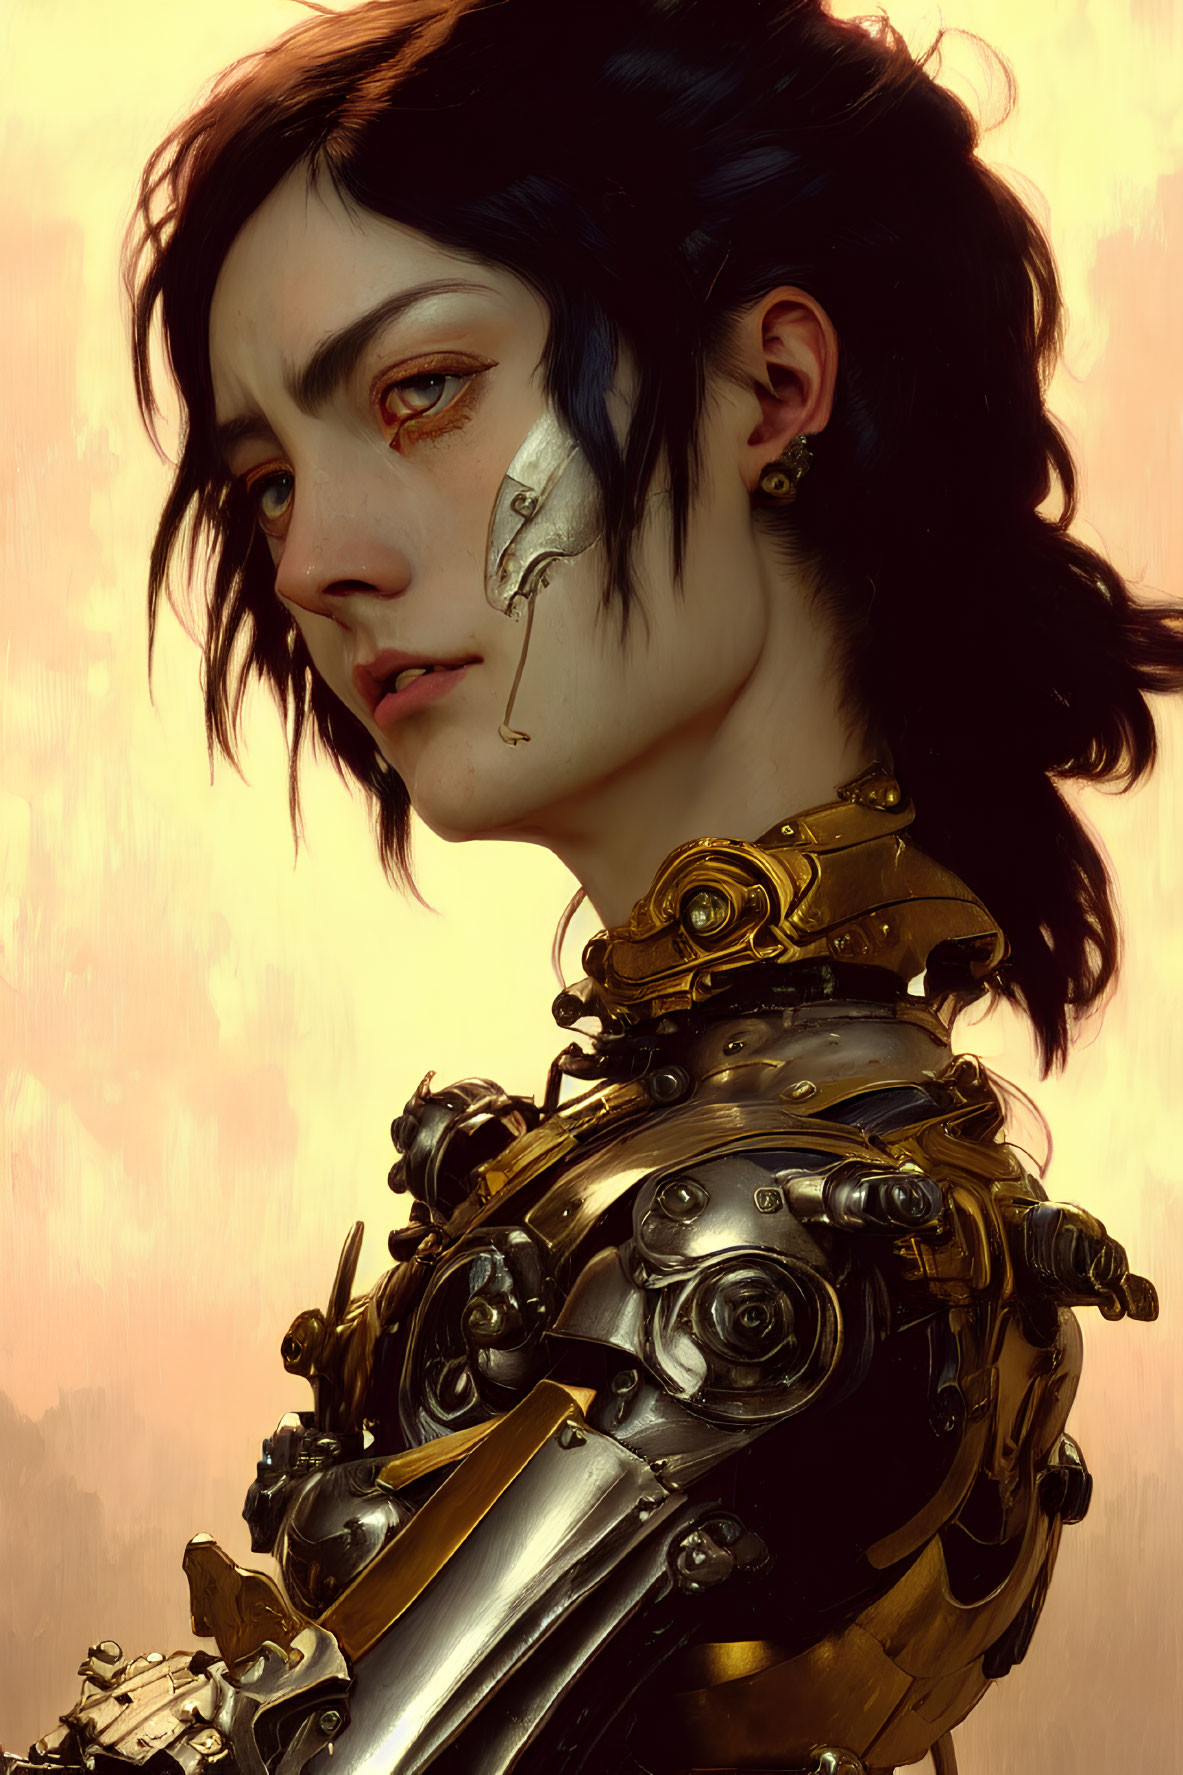 Digital artwork of female figure with dark hair and cybernetic body showcasing intricate mechanical details.